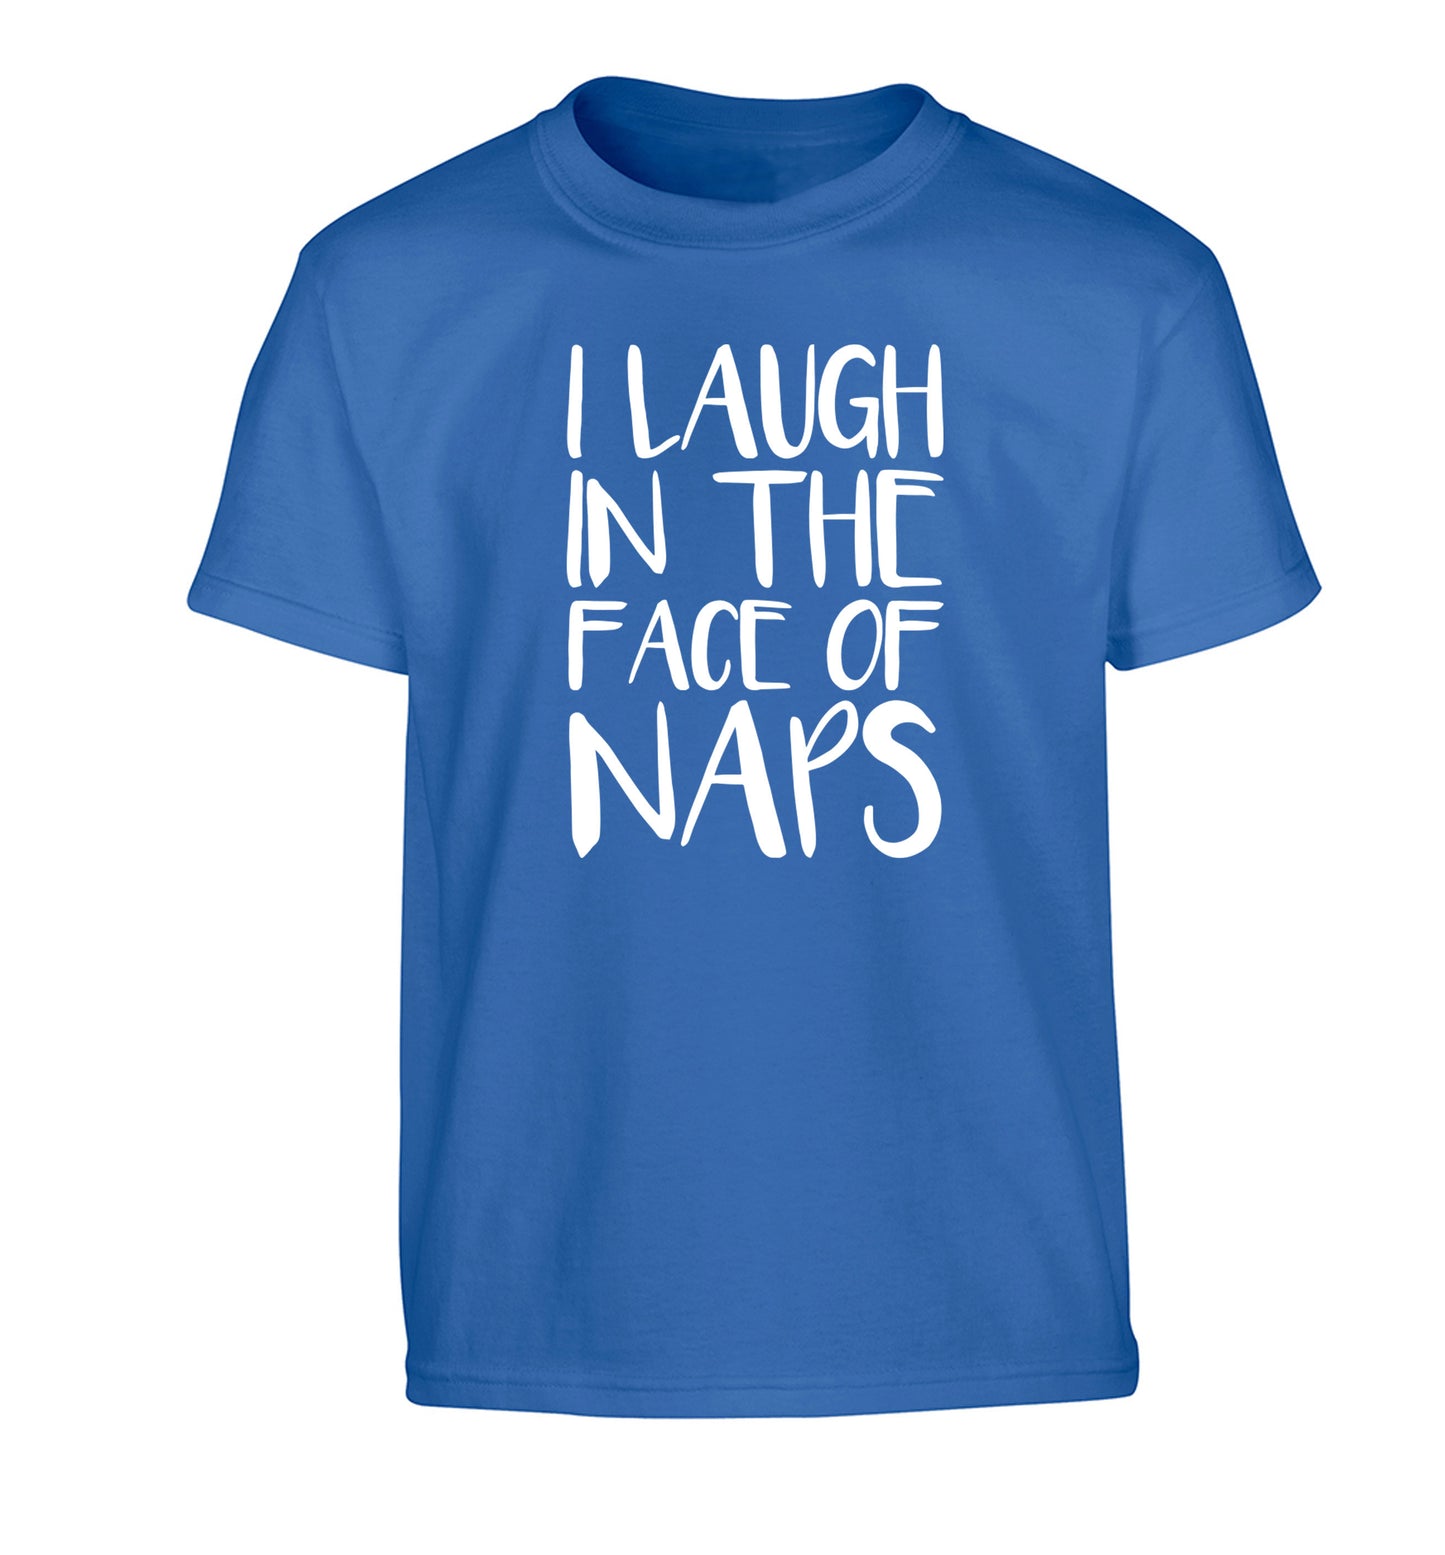 I laugh in the face of naps Children's blue Tshirt 12-14 Years